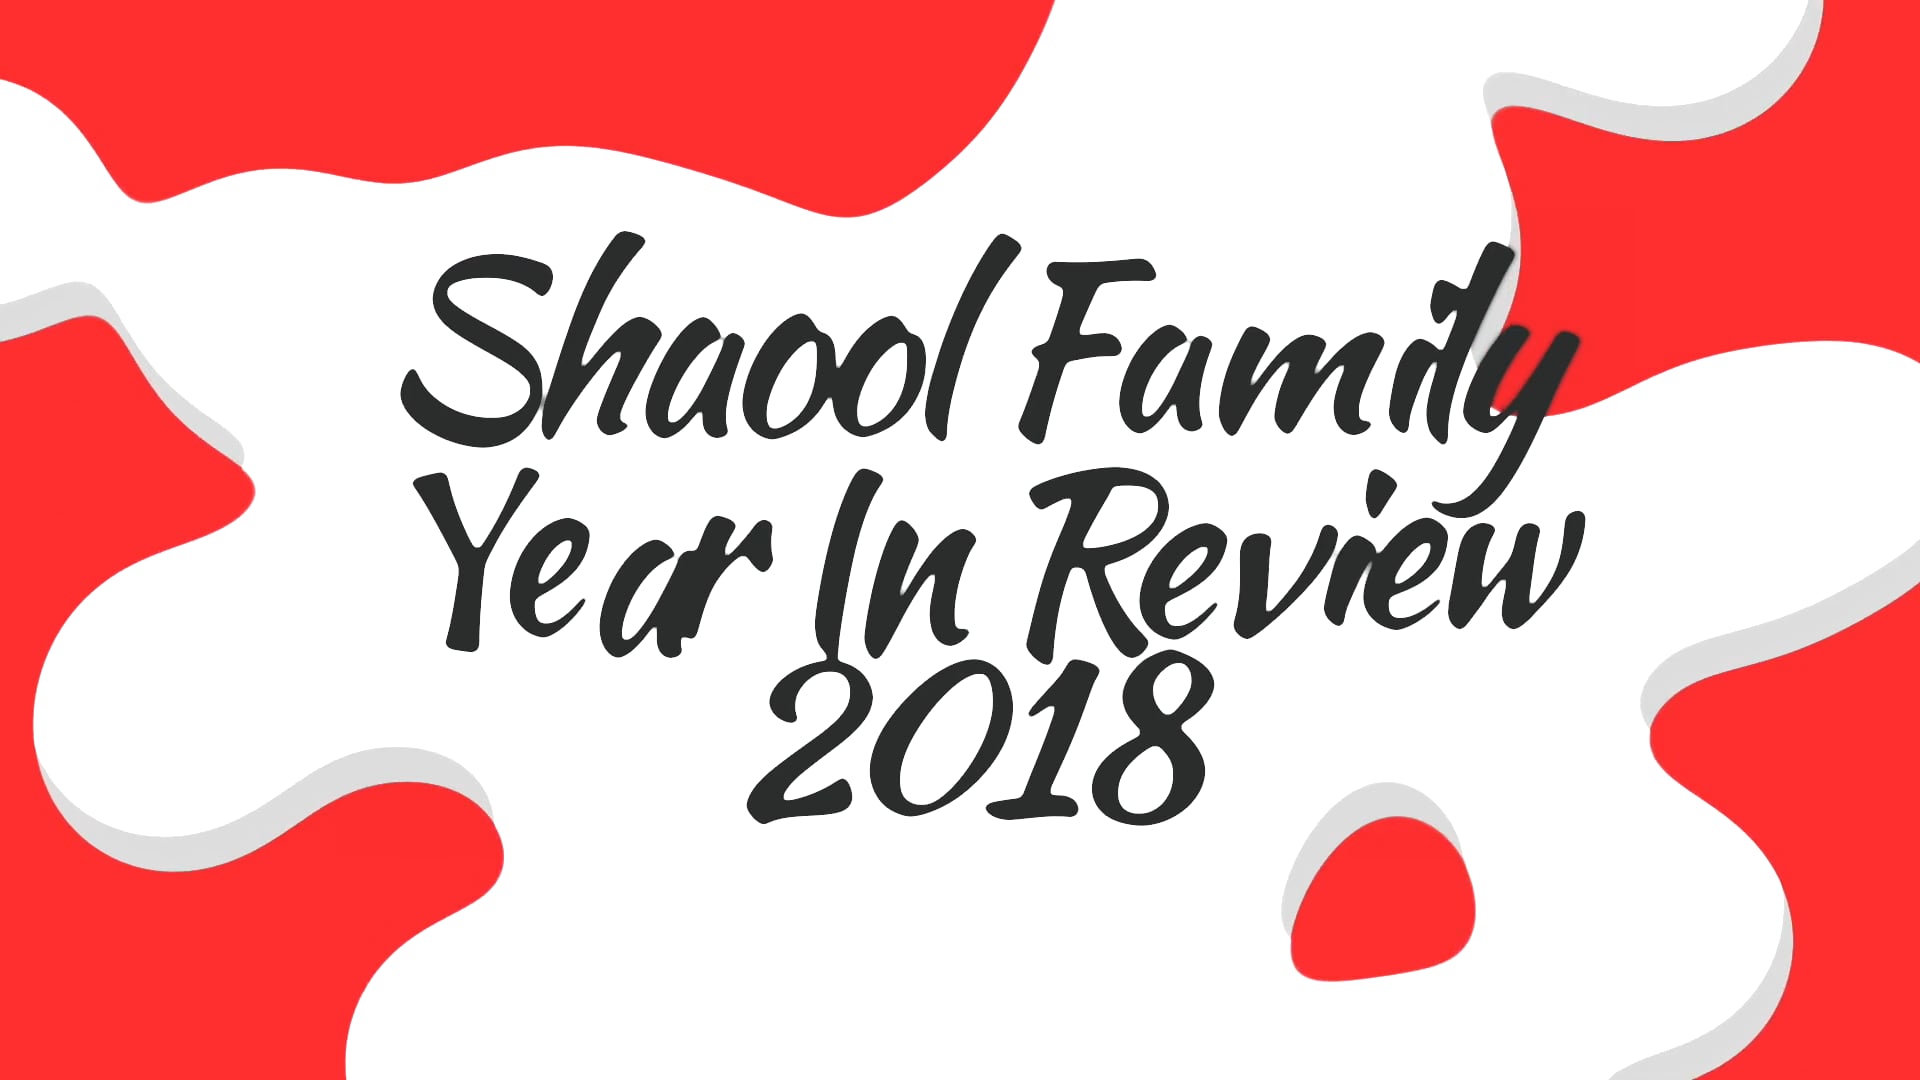 Shaool Family Year In Review: 2018